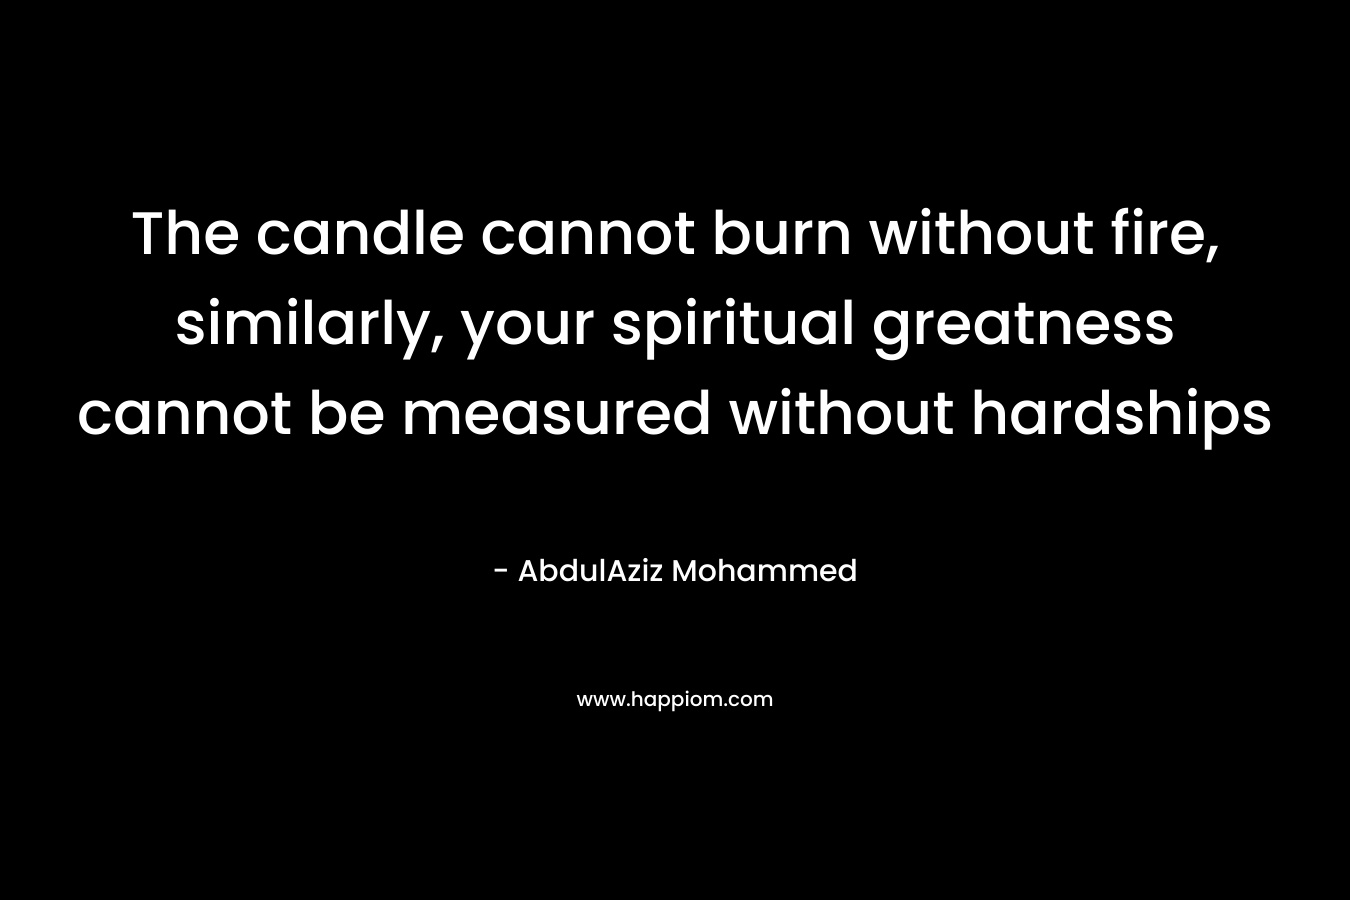 The candle cannot burn without fire, similarly, your spiritual greatness cannot be measured without hardships – AbdulAziz Mohammed